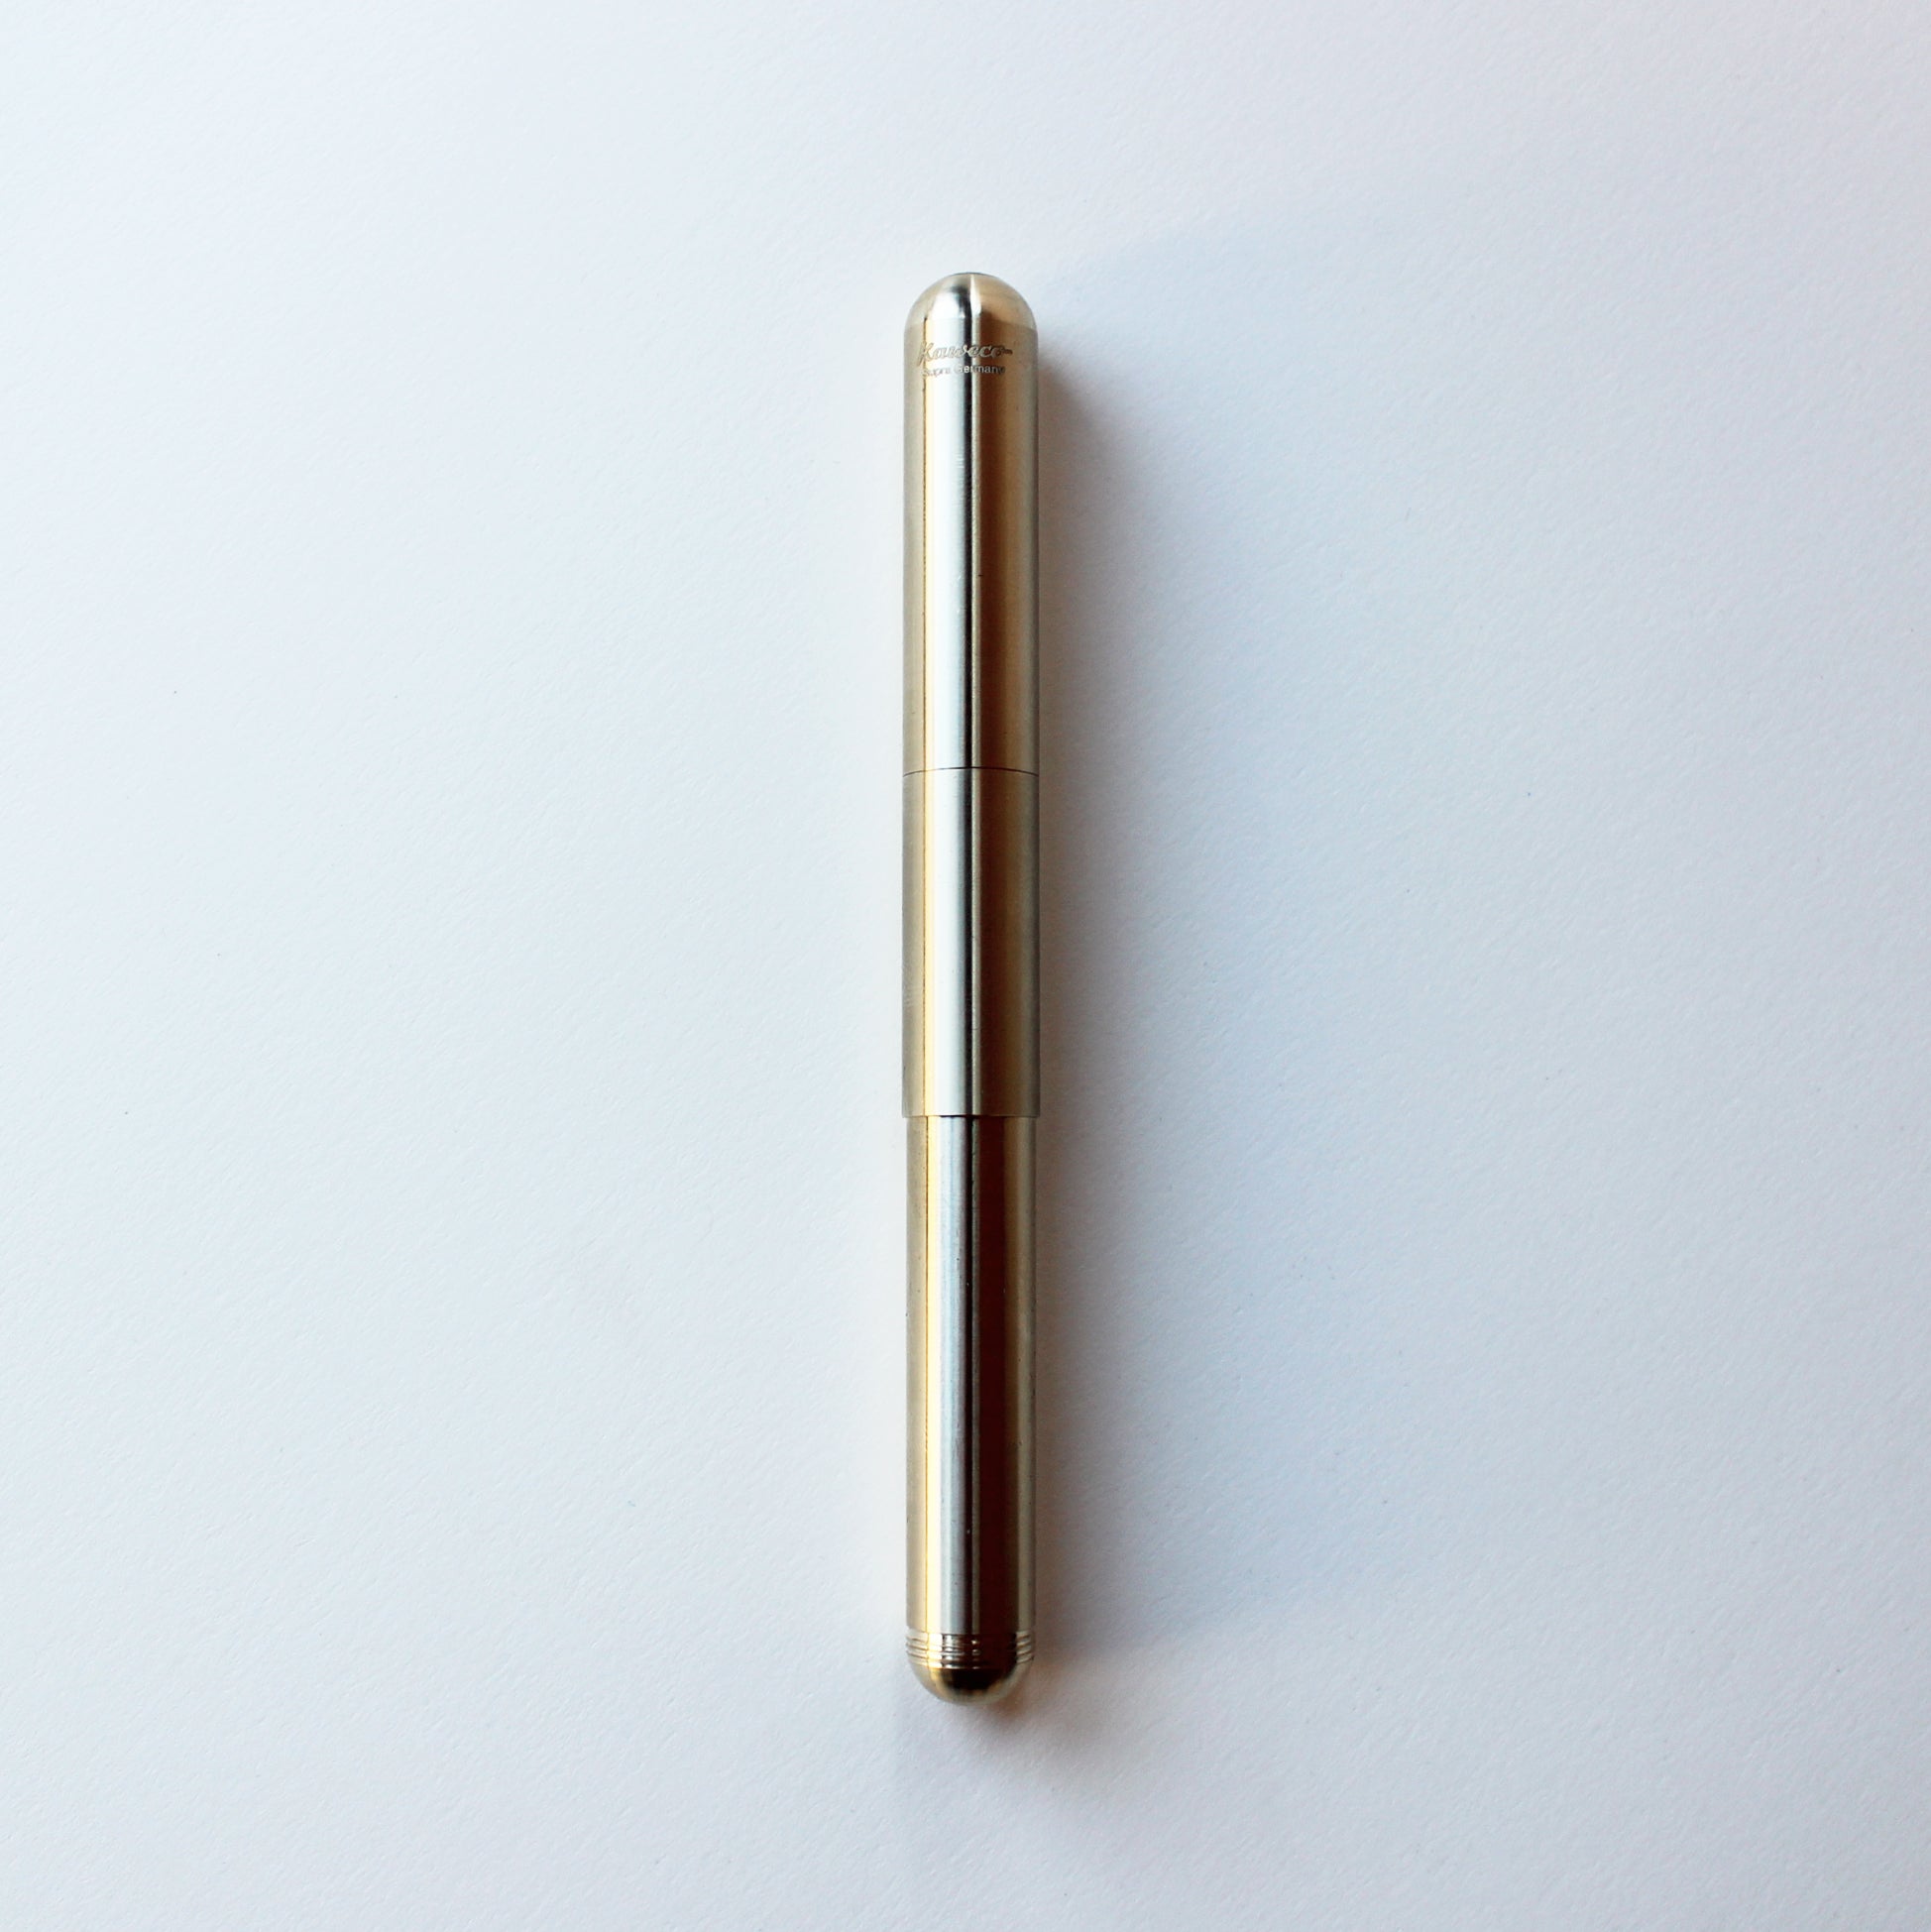 Kaweco Brass Supra Fountain Pen with cap on